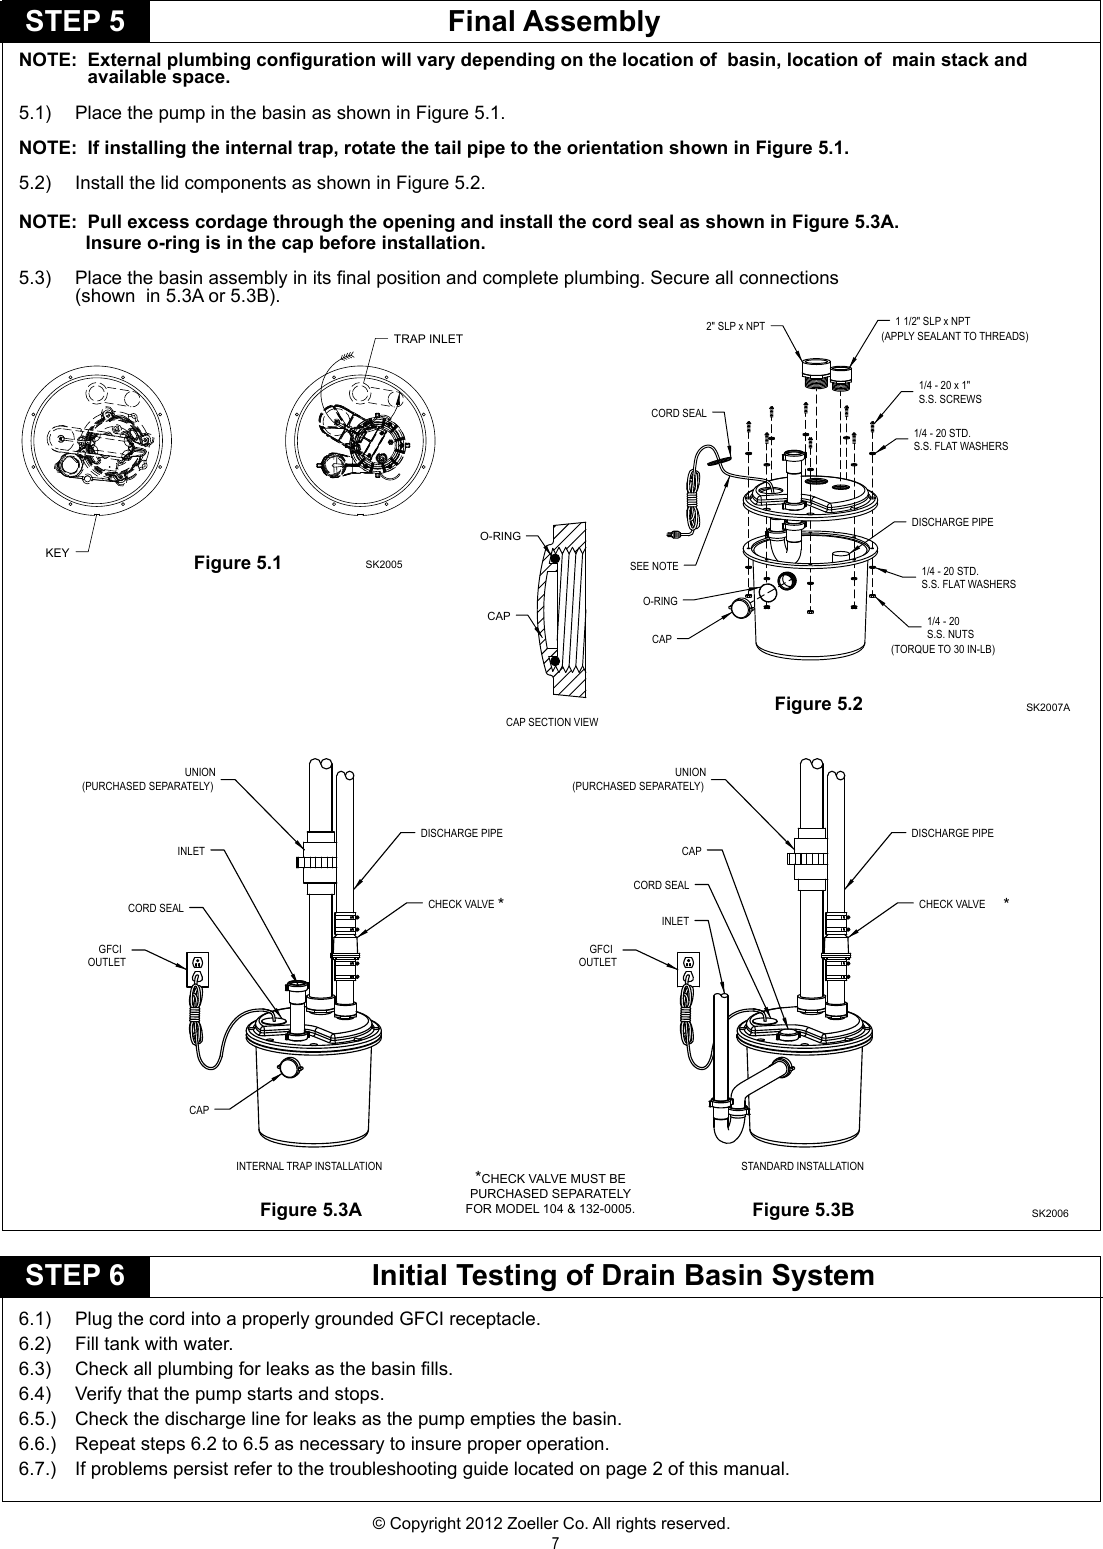 Page 7 of 8 - 2025 2 Zoeller Drain Pump Instructions User Manual